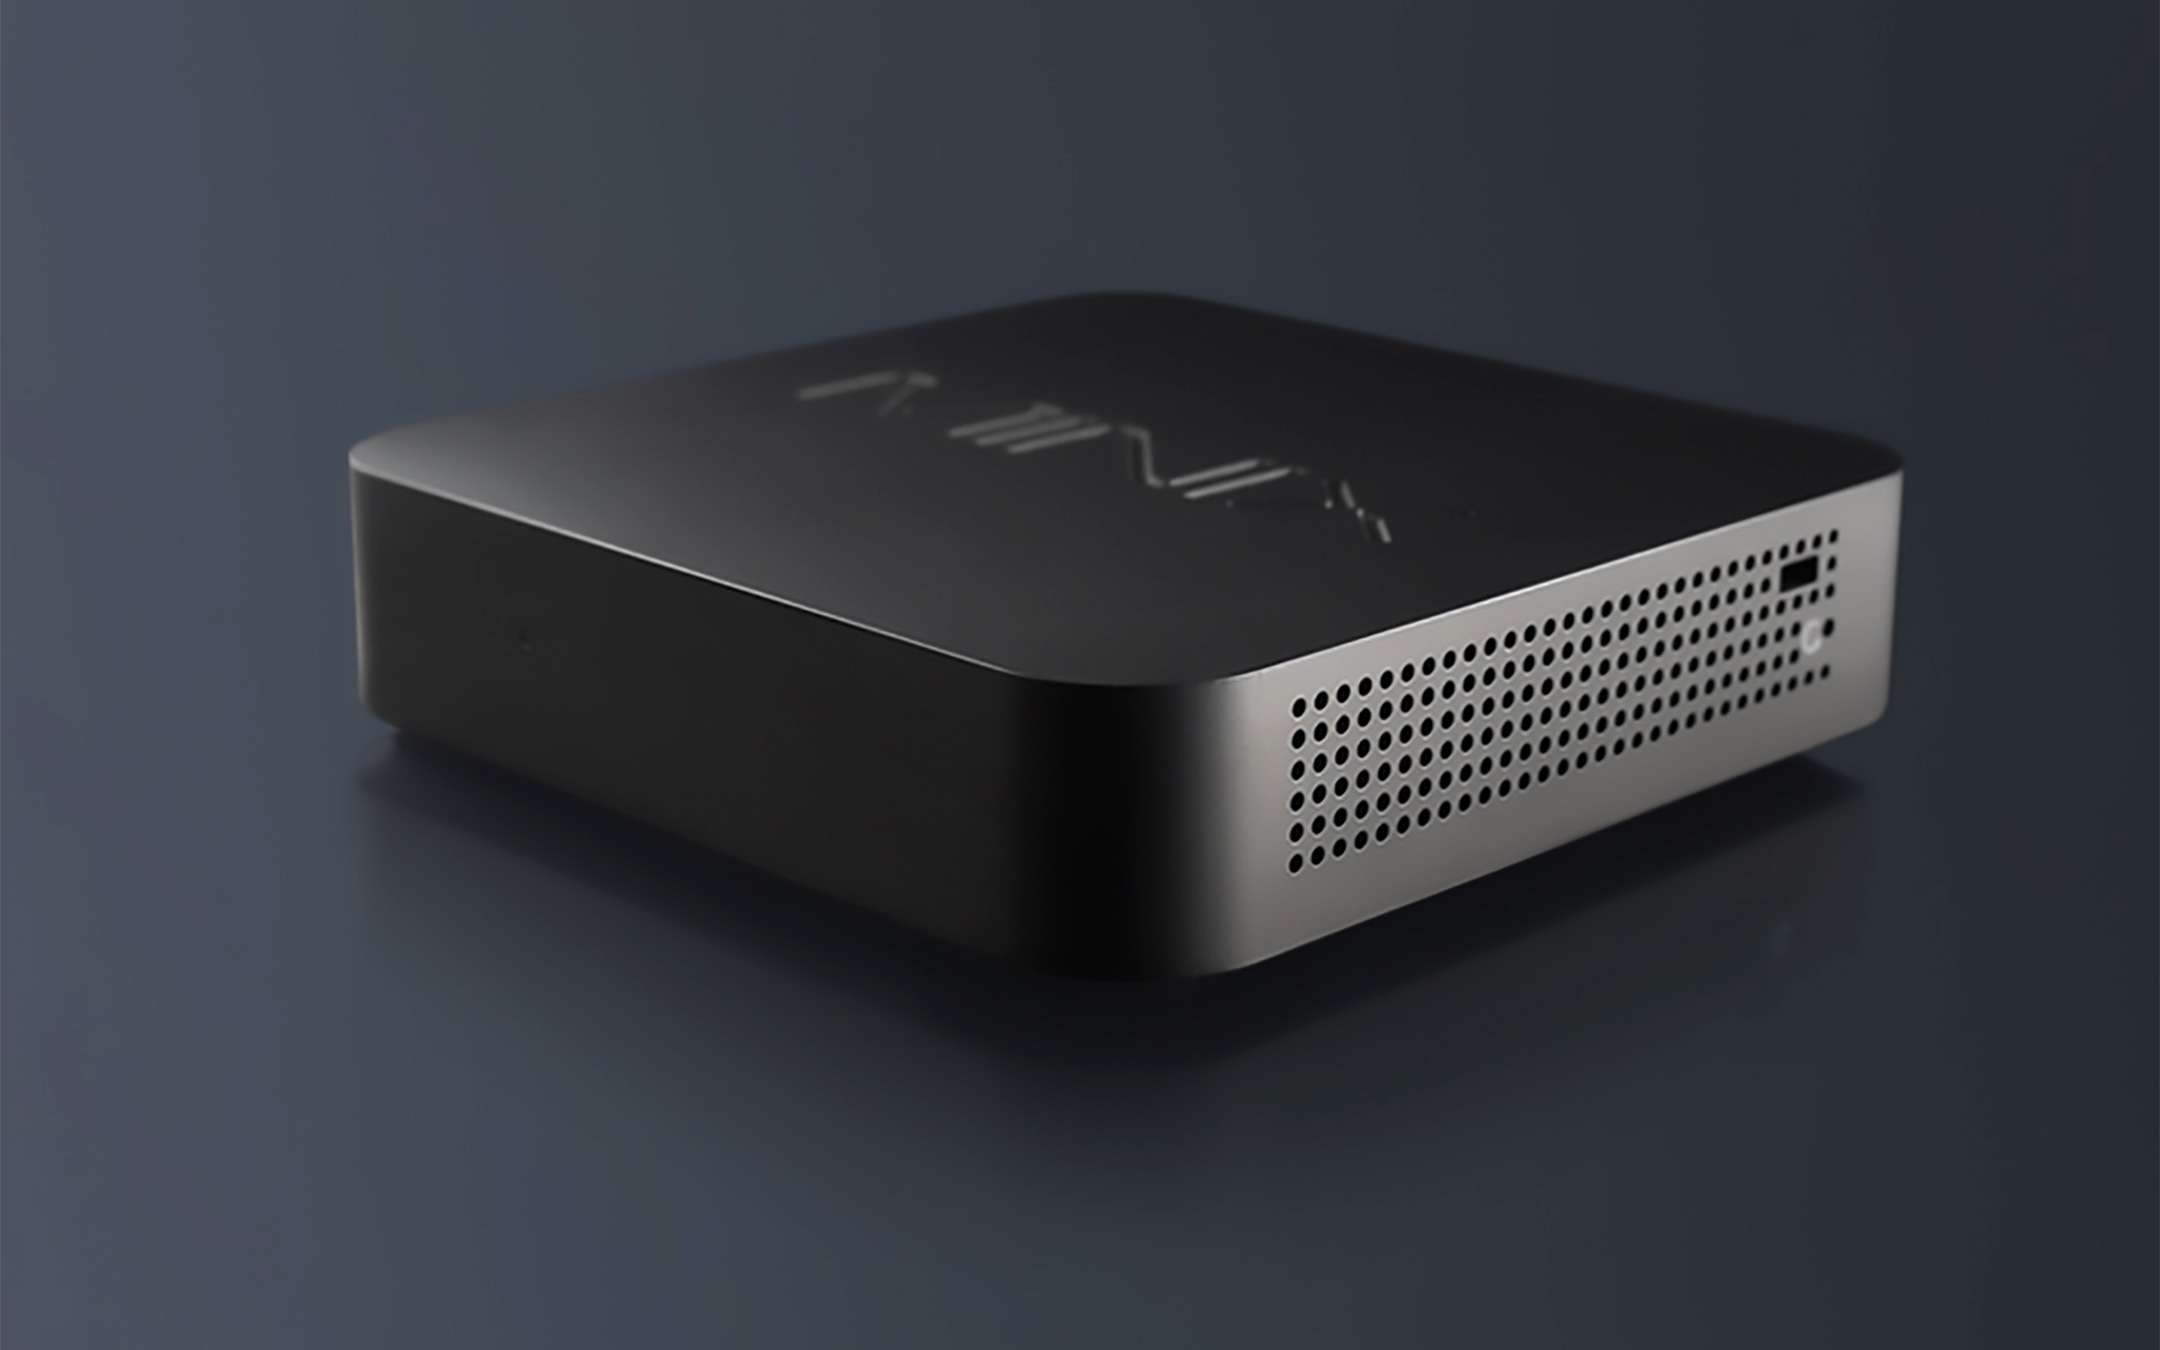 The Minix Mini PC at an all-time low on Amazon